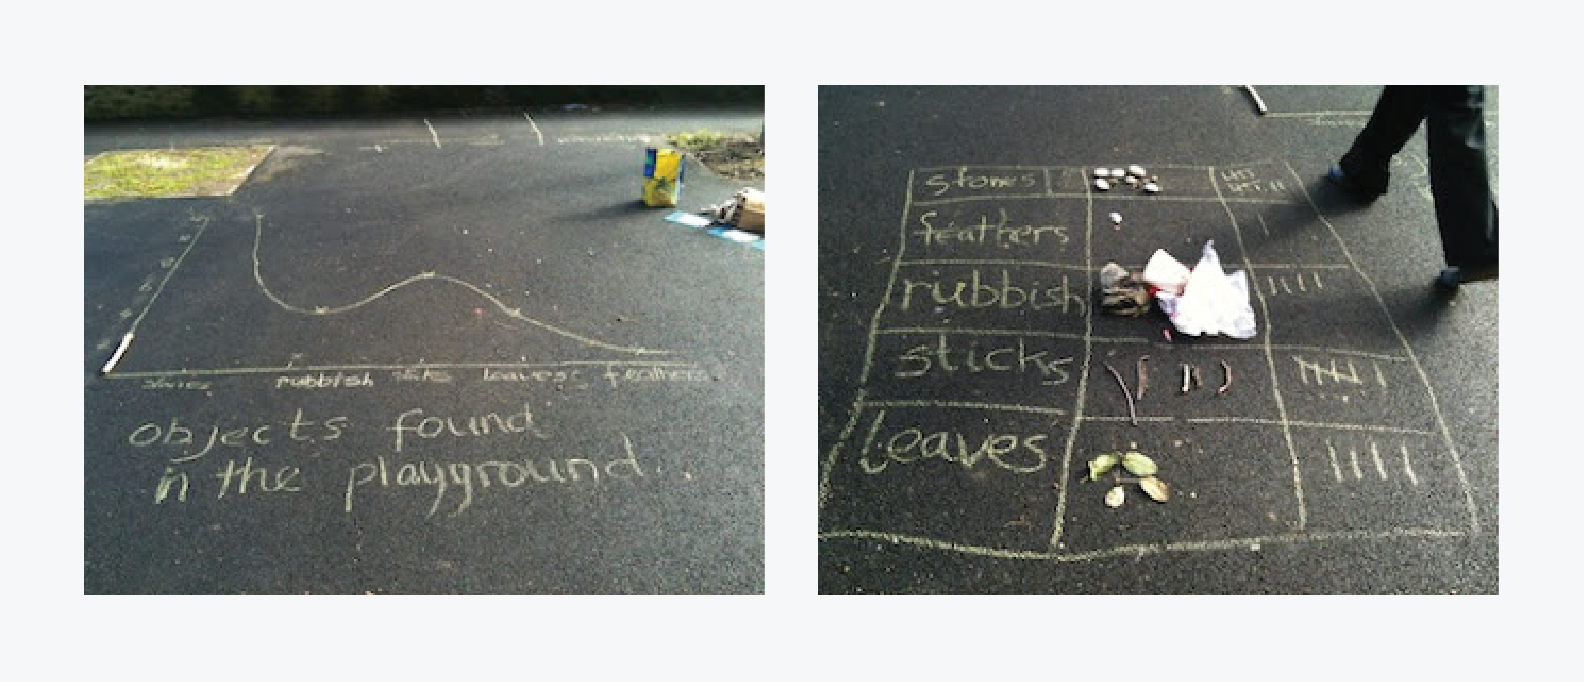 A chalk drawing of a graph on the ground that shows items found in the playground along with the tally chart that keeps track of the items